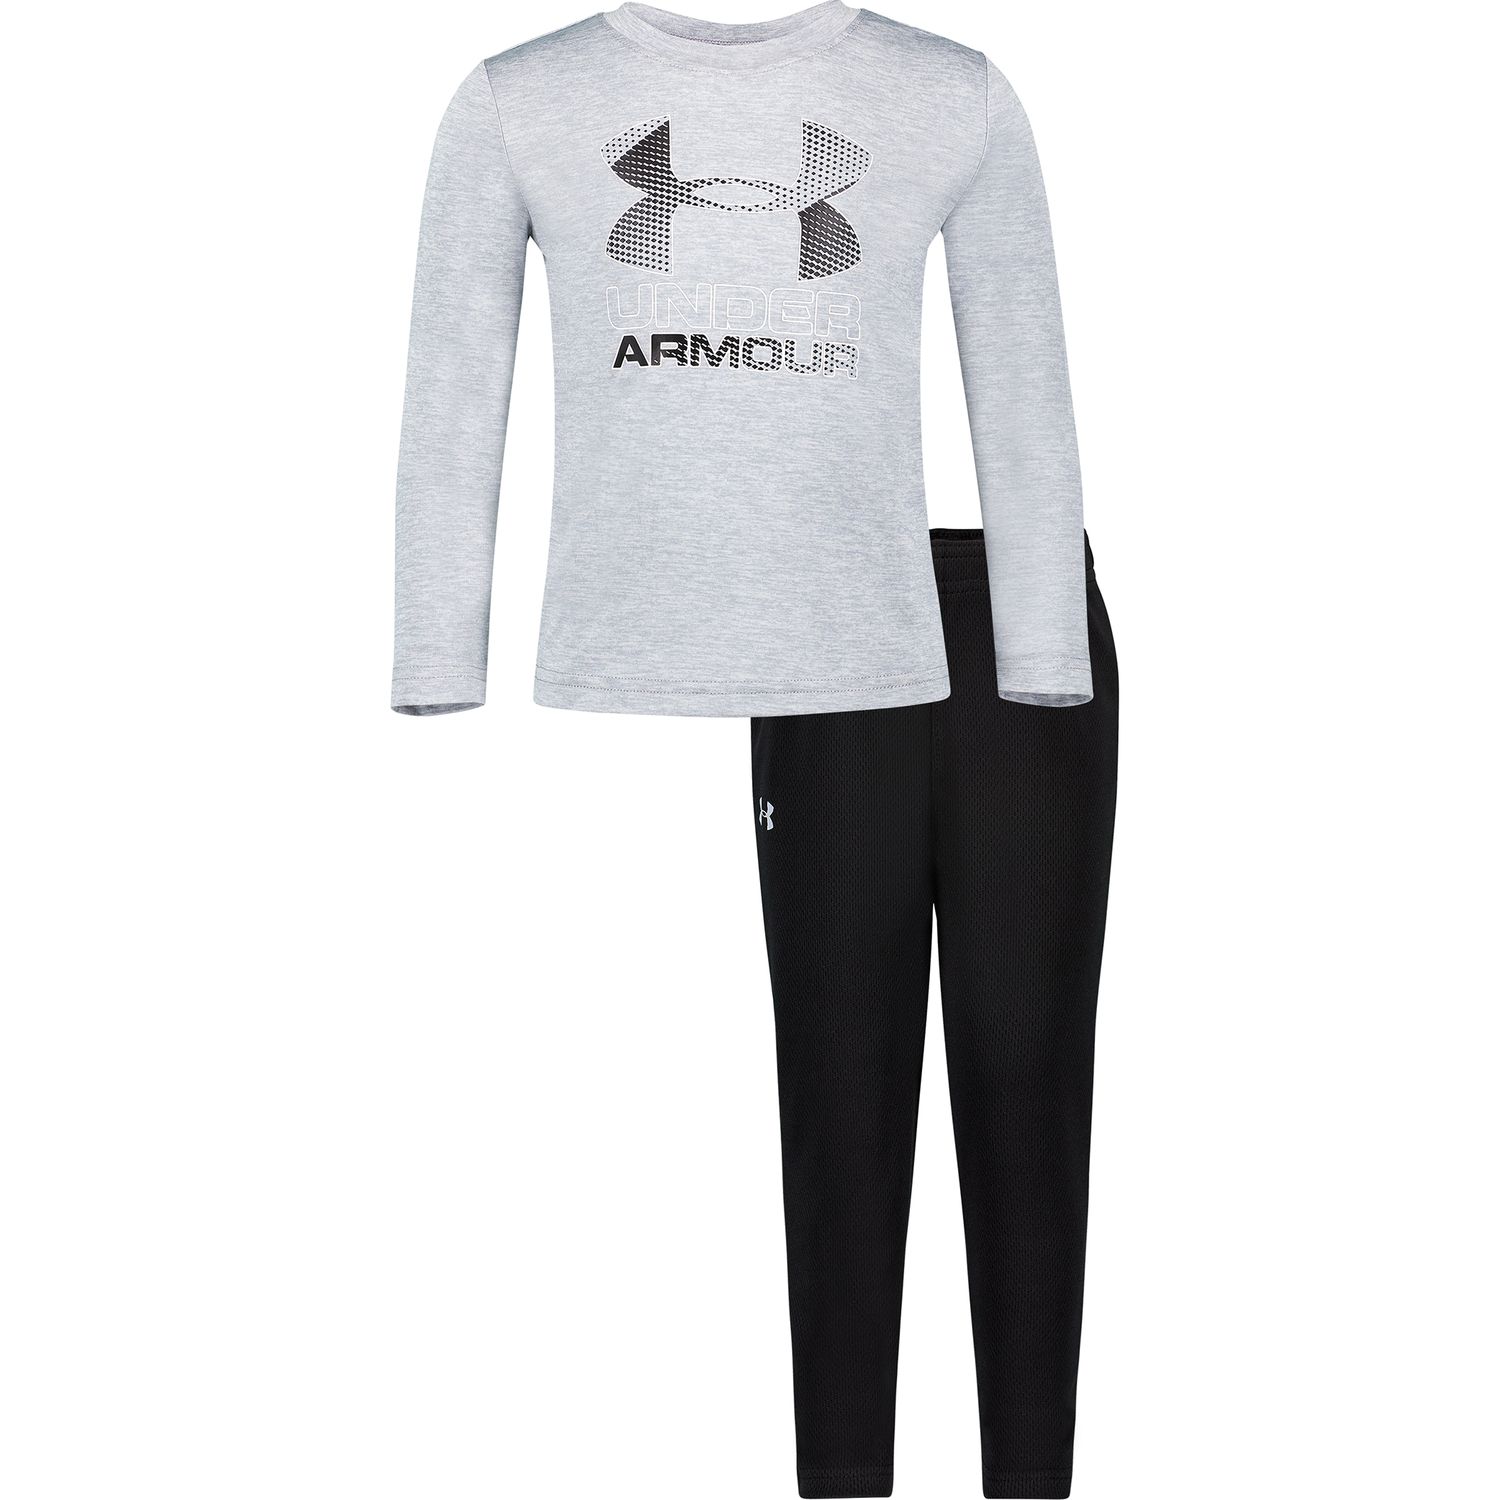 under armour sets for toddlers